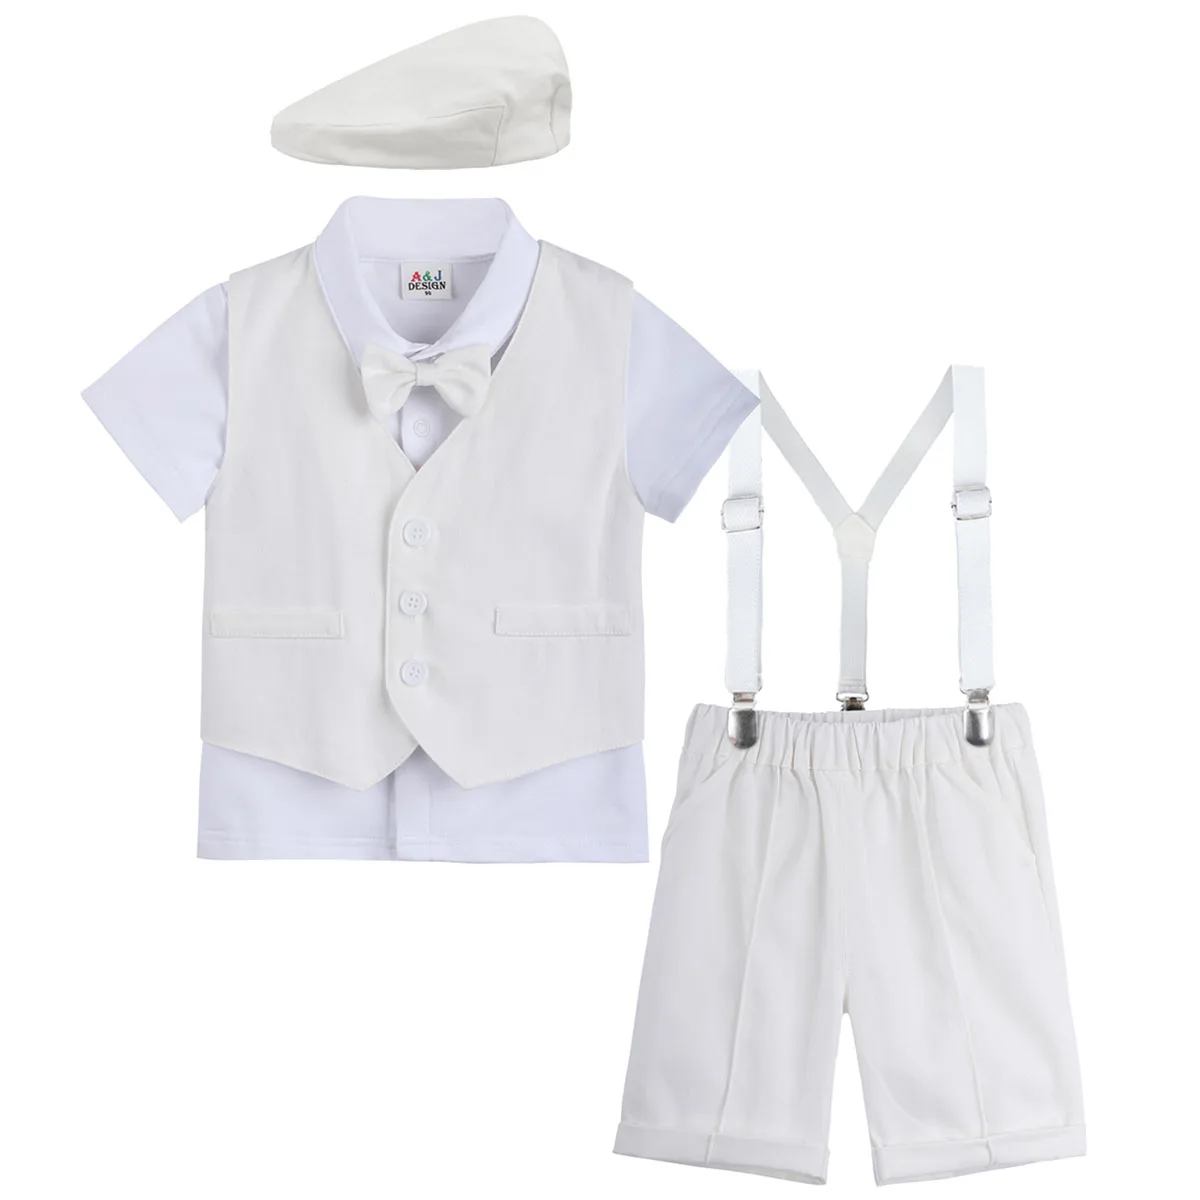 

Baby Boys Baptism Suit Infant Wedding Gentleman Party Gift Costume White Bow Tie Suspender Overall Christening Sets 4PCS